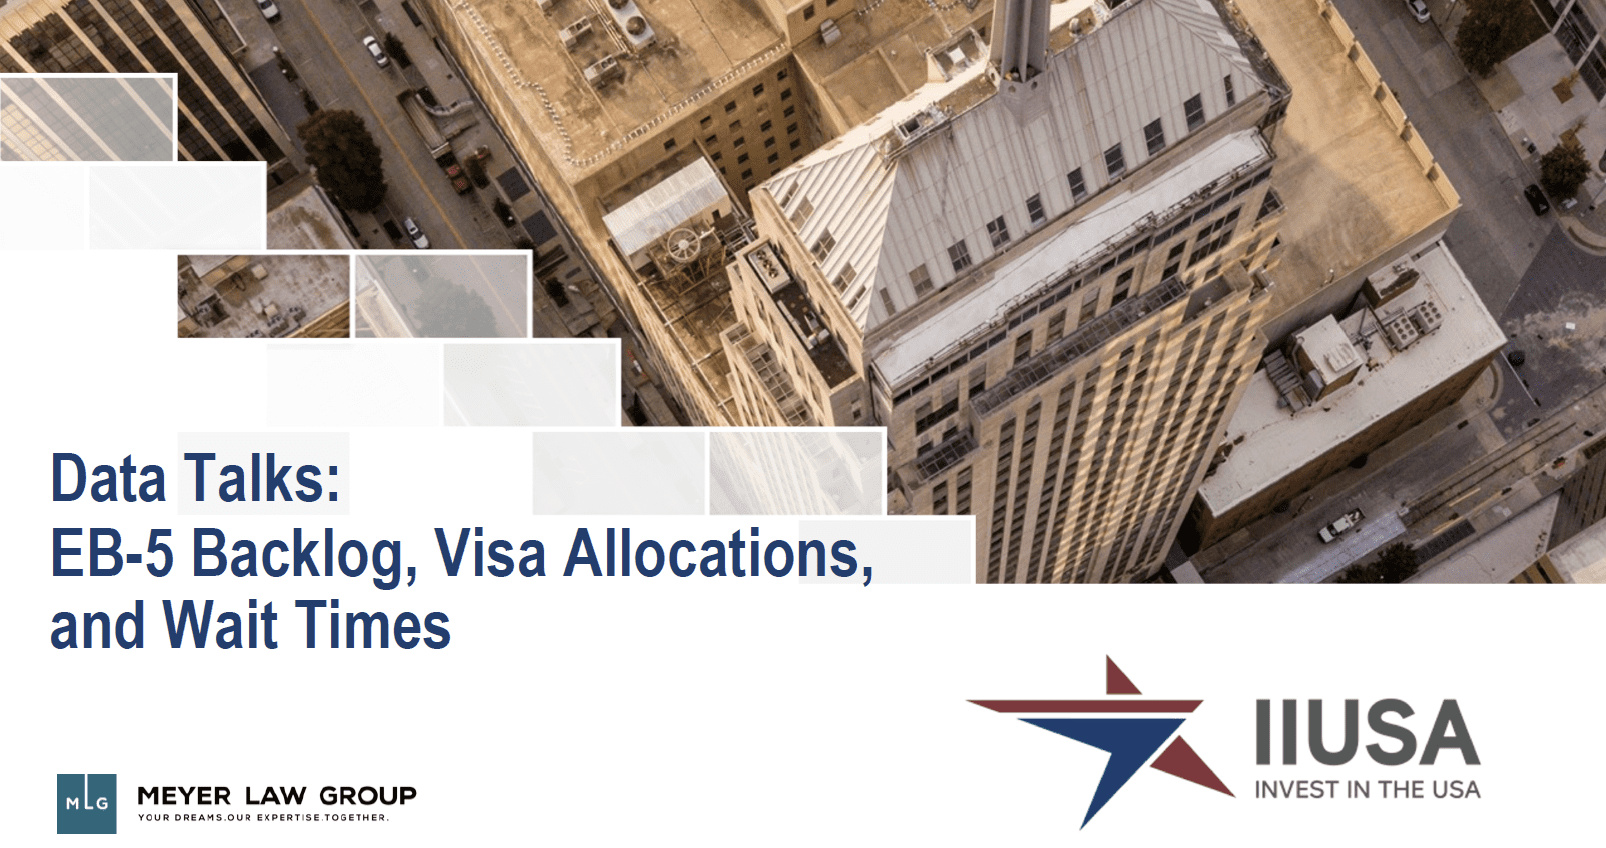 Data Talks: EB-5 Backlog, Visa Allocations, and Wait Times – Webinar Recording Now Available